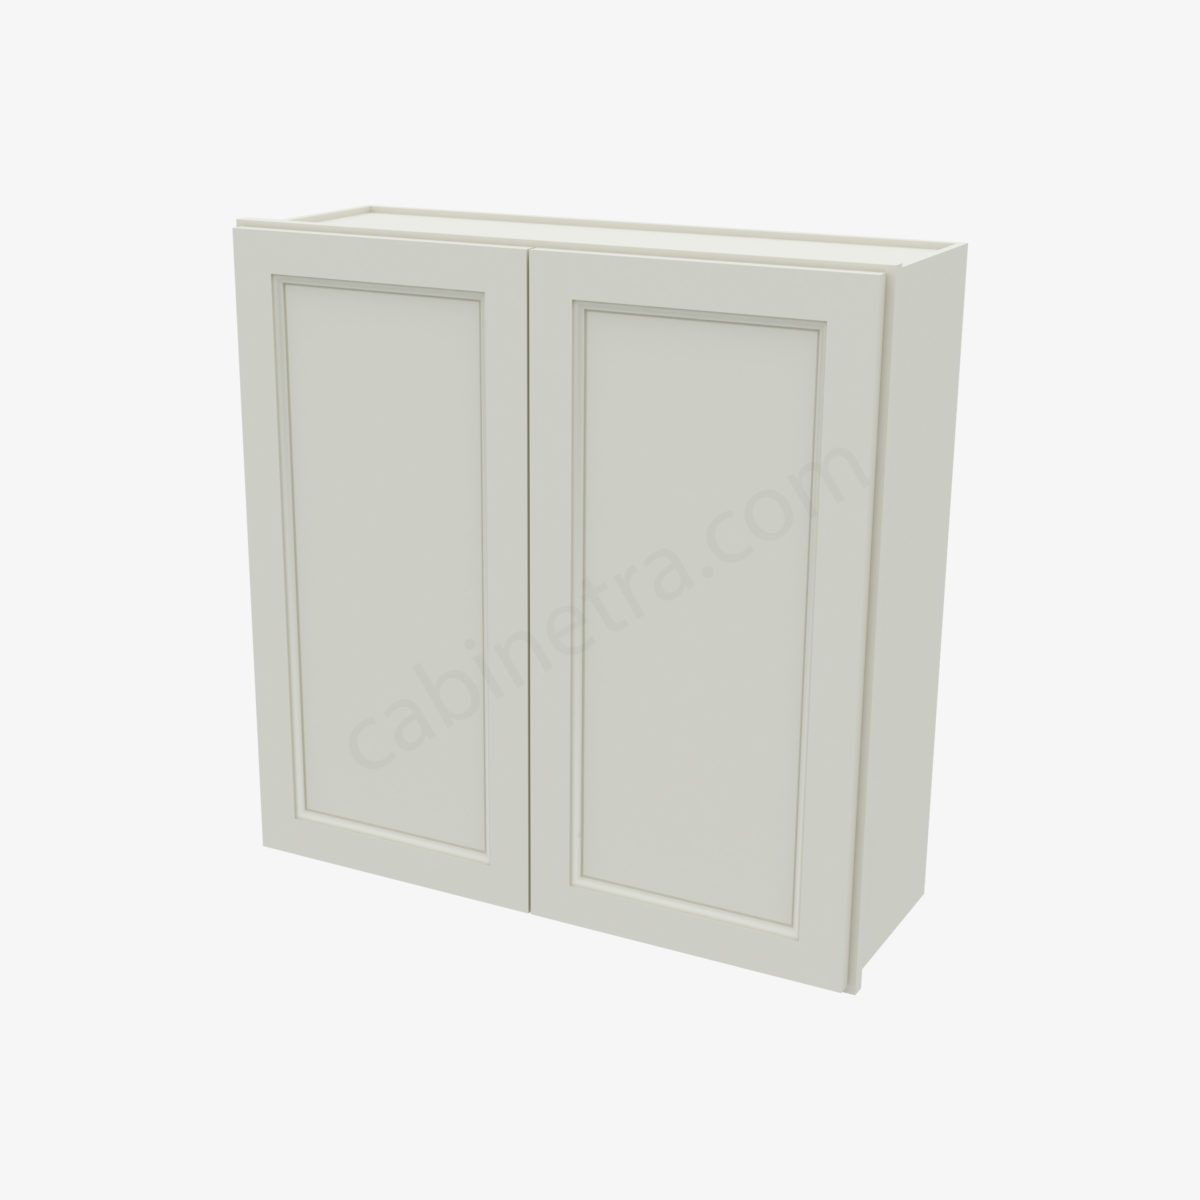 TQ W3636B 0 Forevermark Townplace Crema Cabinetra scaled